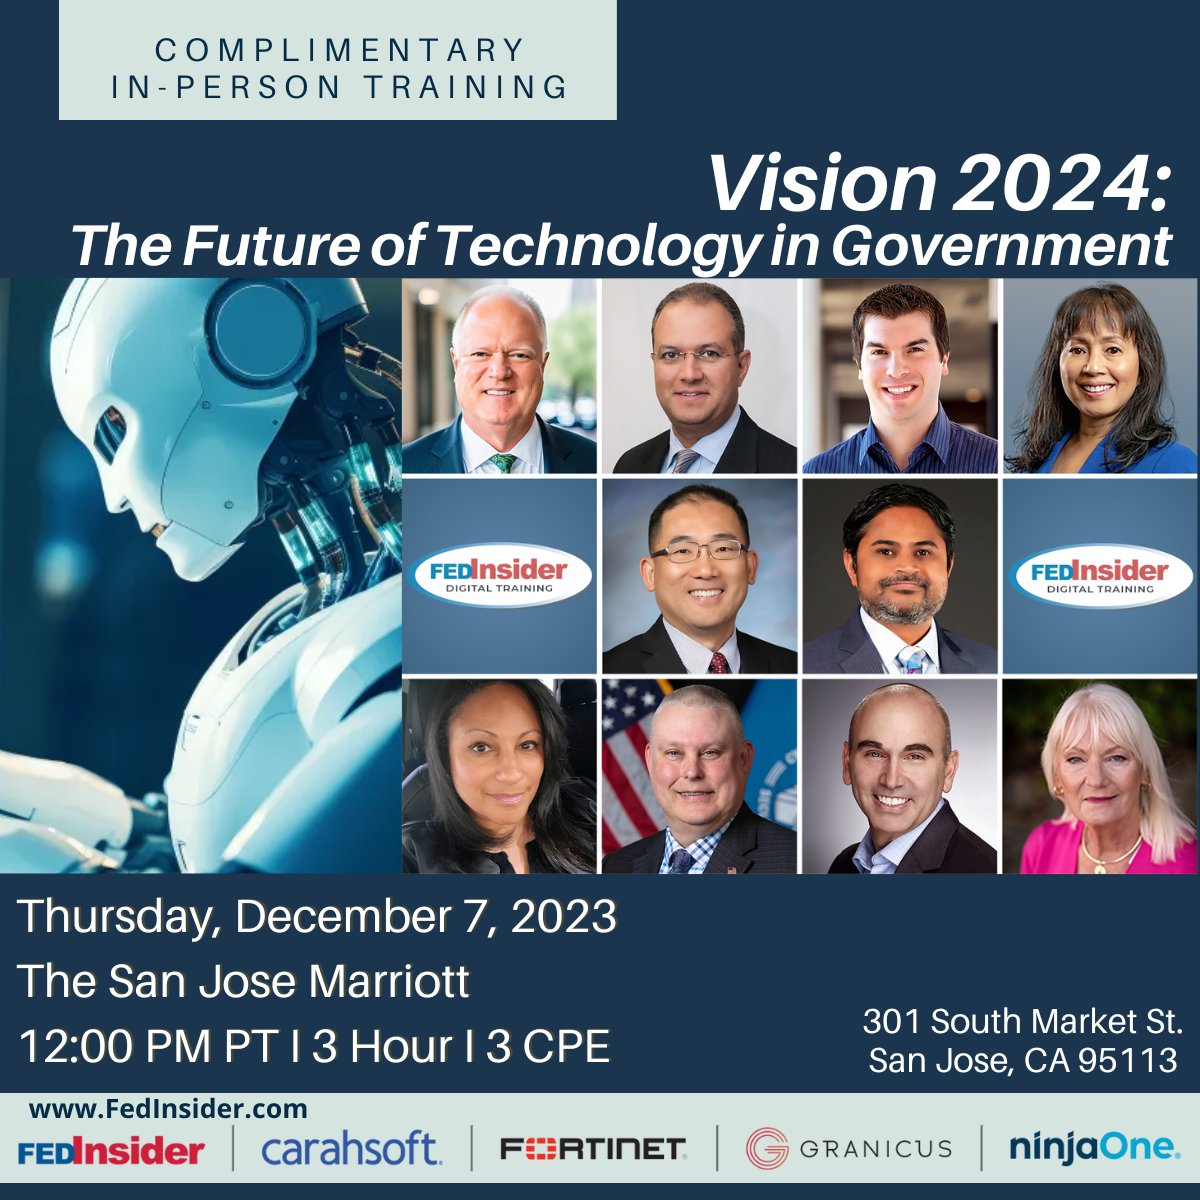 Join @FedInsider in San Jose, CA on 12/7 in person, where government & industry thought leaders explore state & local tech integration for better constituent services! Register free: tinyurl.com/2fmuw8dk @PegHosky @Carahsoft @Fortinet @ninjaone @Granicus